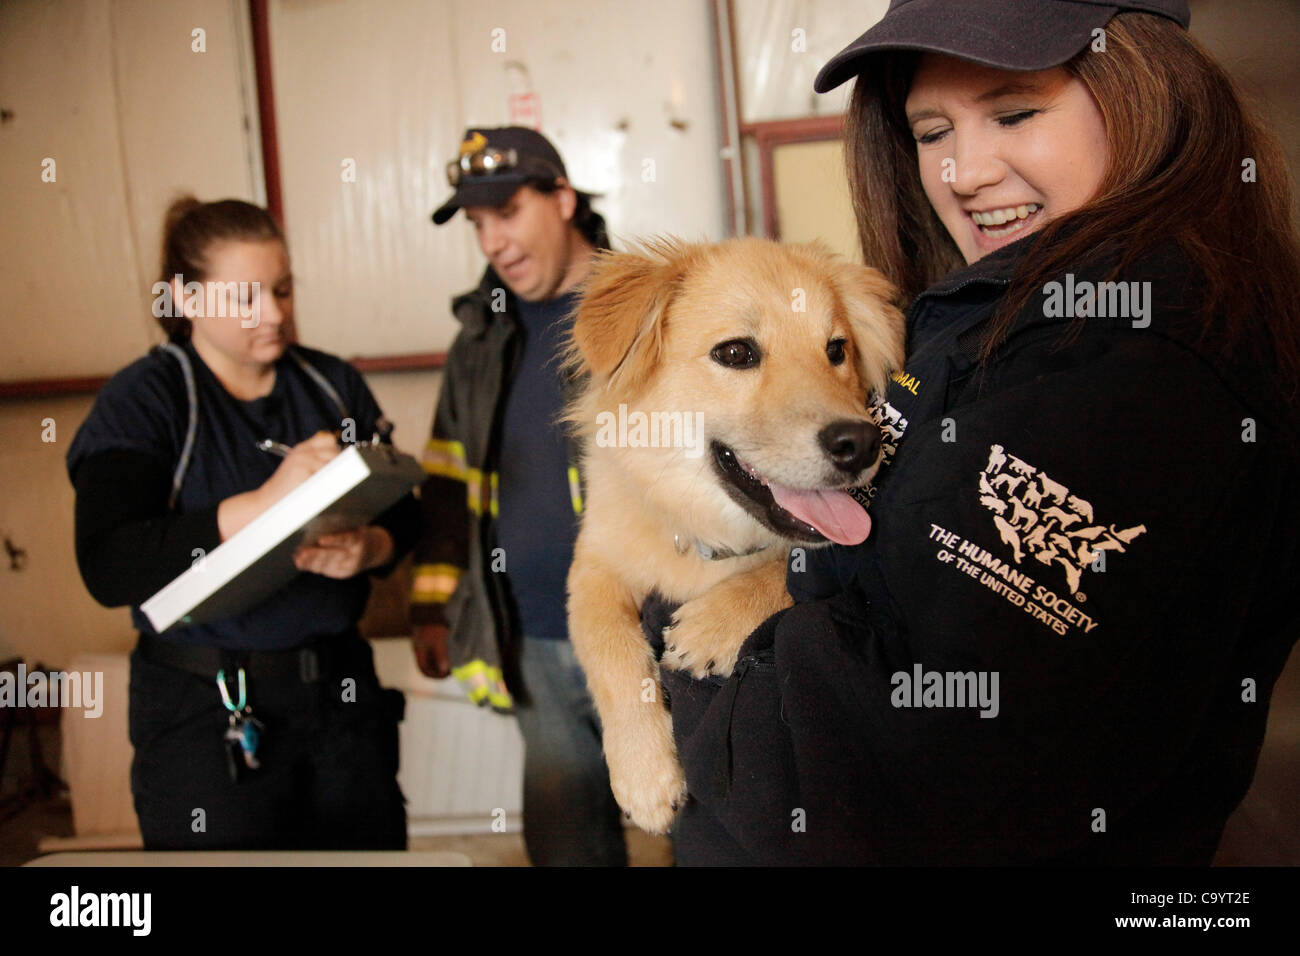 March 9, 2012 - London, Kentucky, USA - Operations chief Julie Casteneda comforts a stray dog which was just brought into The Humane Society of the United States' emergency animal shelter by Brandon Zacharias, center, a member of the East Bernstadt Fire Department, in the aftermath of tornados that  Stock Photo